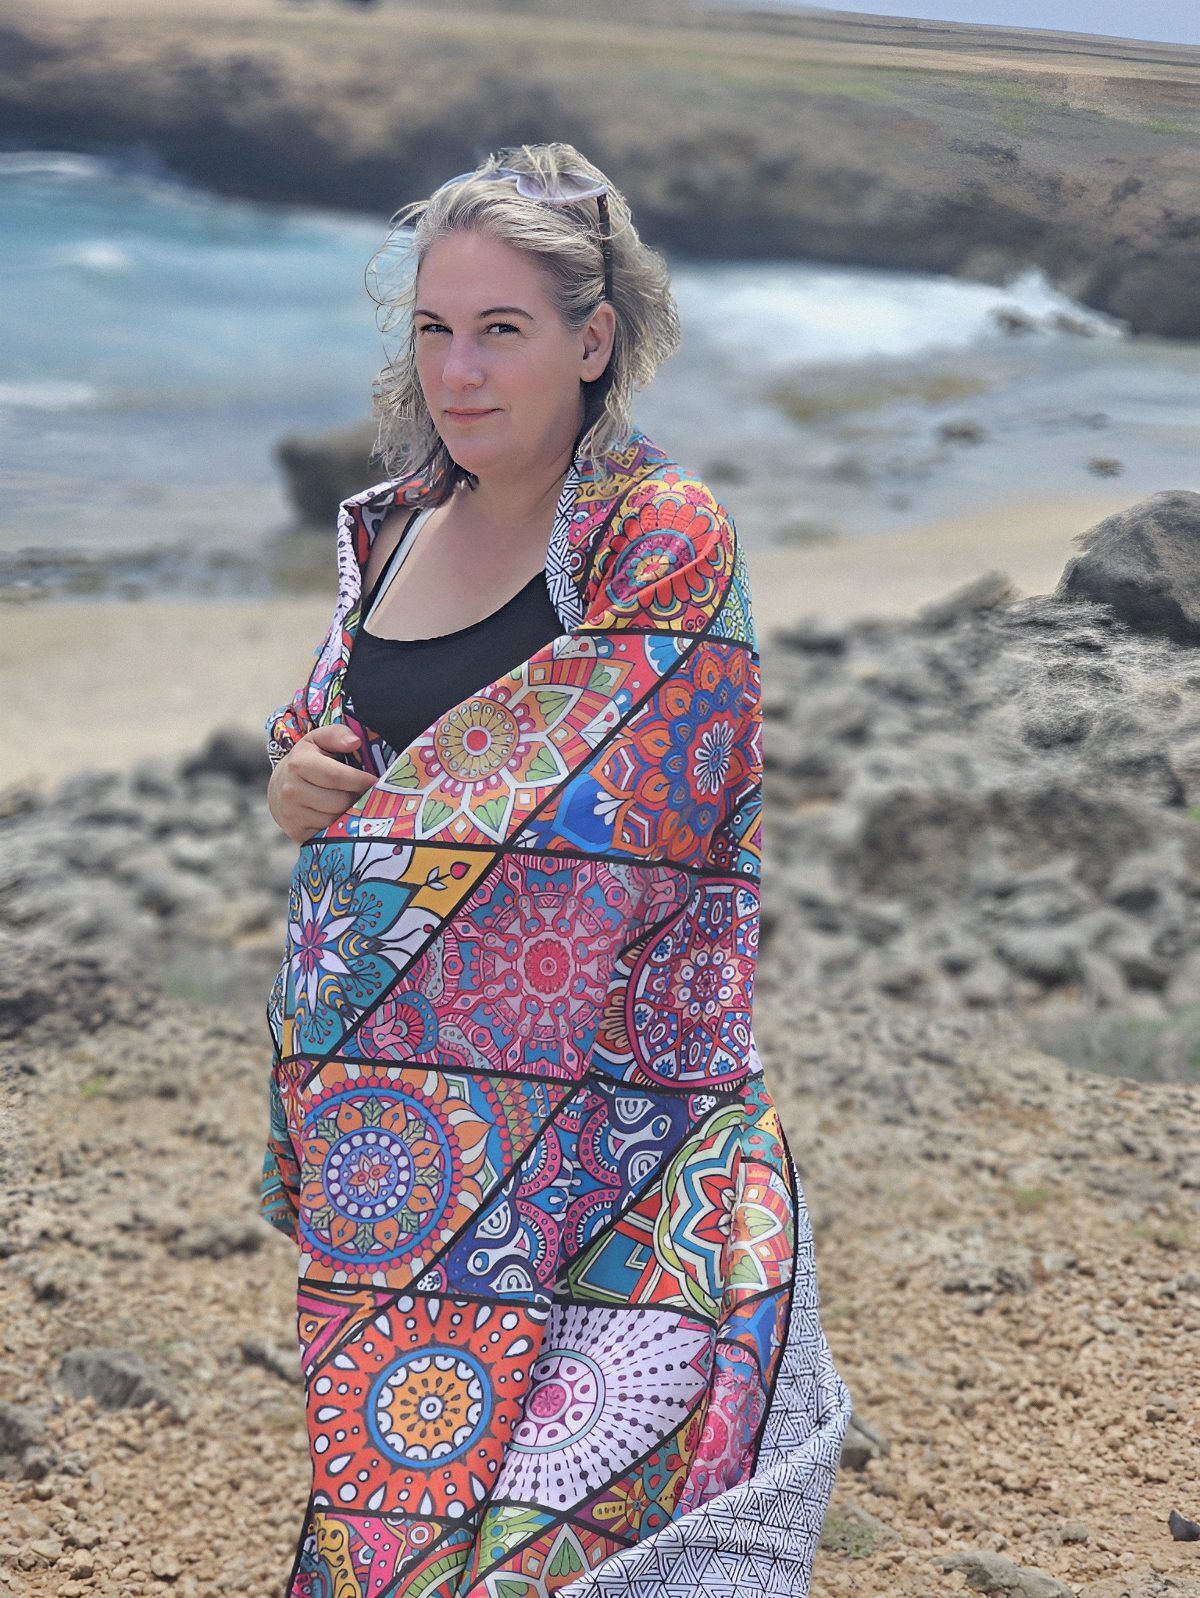 54-year-old travel blogger Kathy Brown stands on a cliff in Aruba, overlooking the Caribbean Sea. She wears a multi-colored beach blanket draped around her shoulders. The wind blows her grey hair in the breeze. The beach blanket moves in the breeze, creating a sense of peacefulness against the rugged terrain.